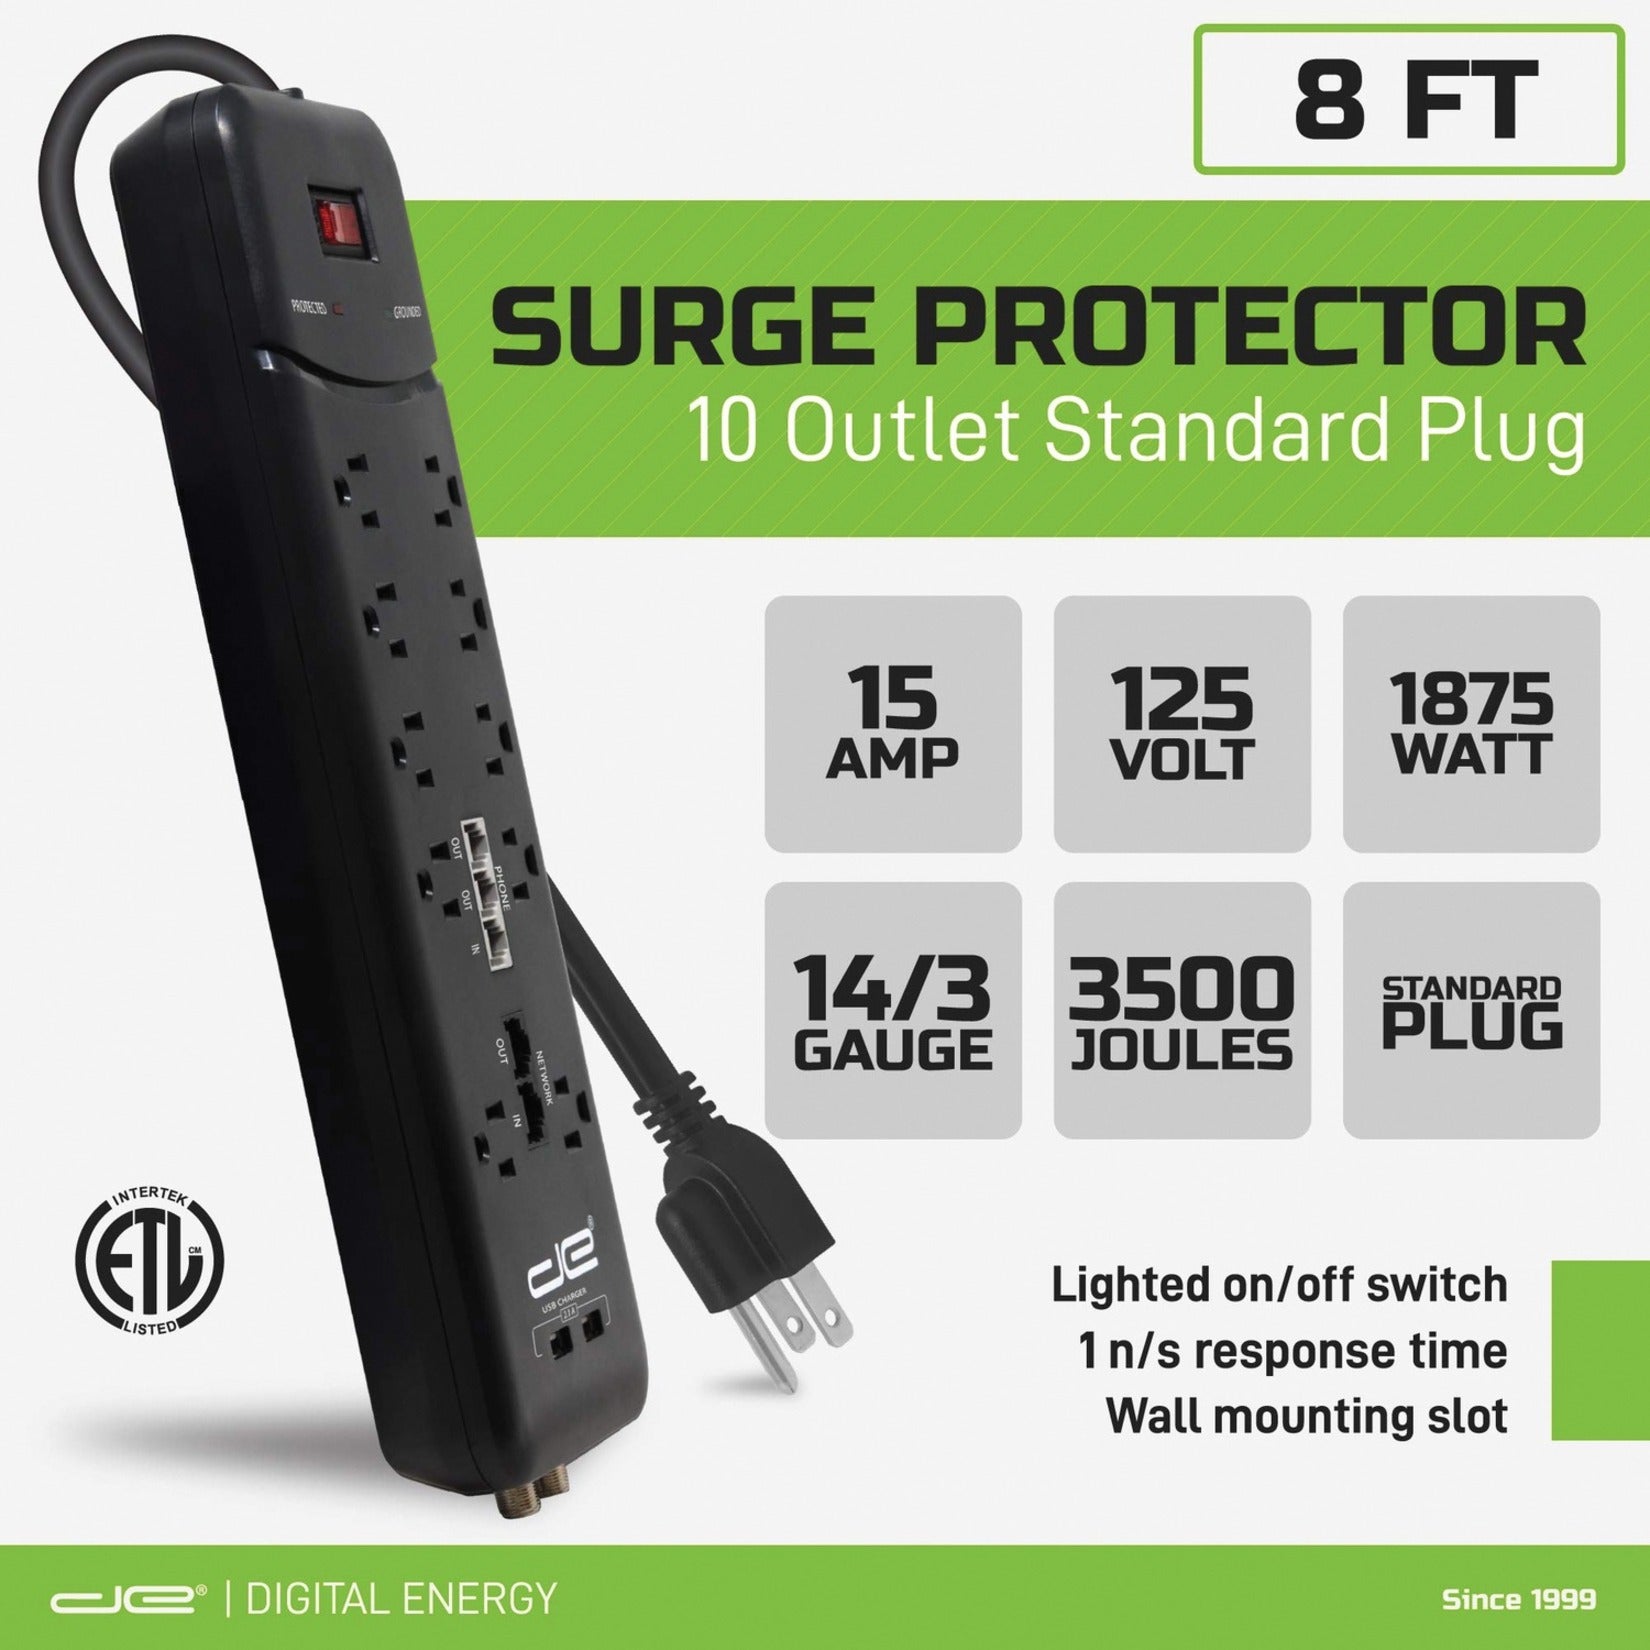 Digital Energy World DSS5-1034-BLK 10-Outlet Surge Protector Power Strip with USB Ports, Coaxial, Phone, and Modem Protection